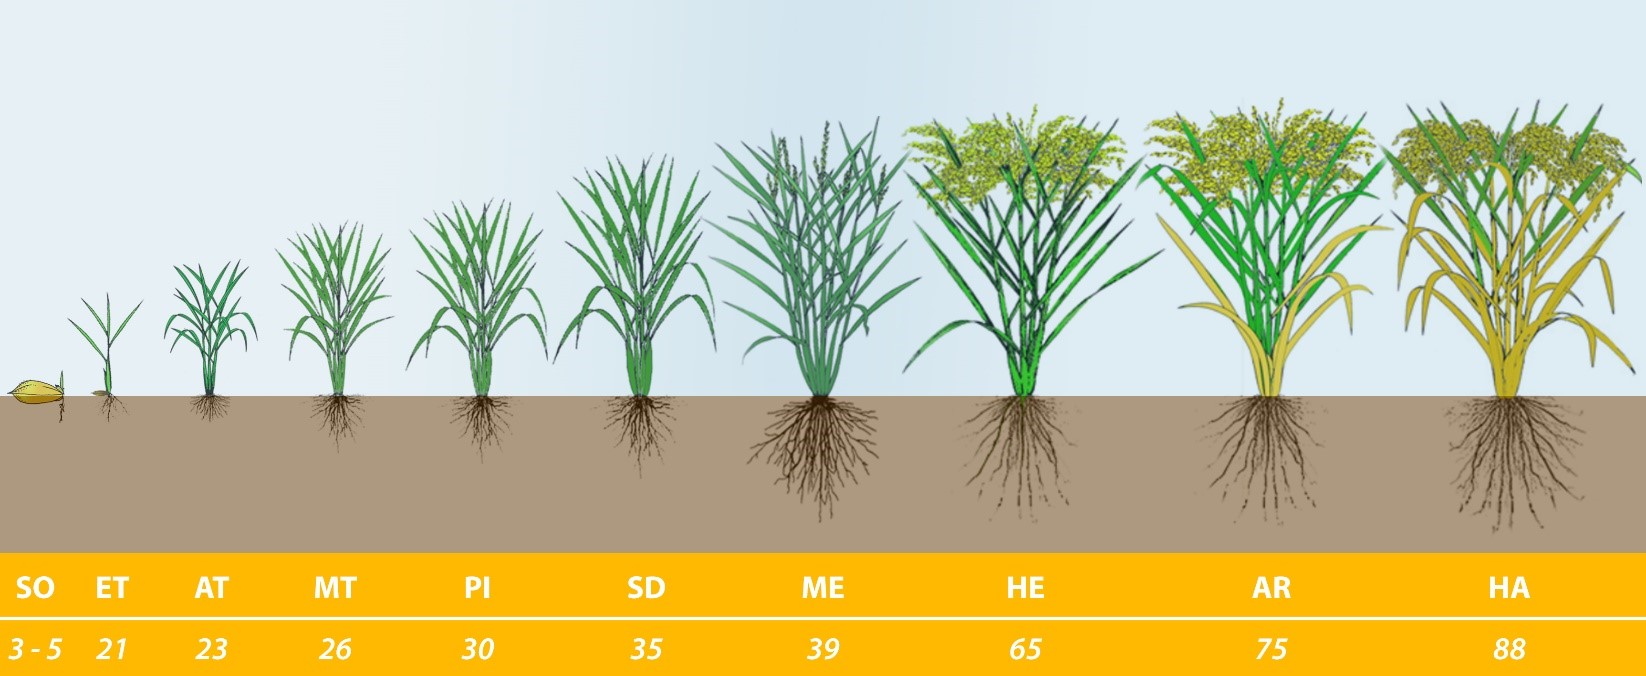 Microbebio RICE PLANT GROWTH STAGES